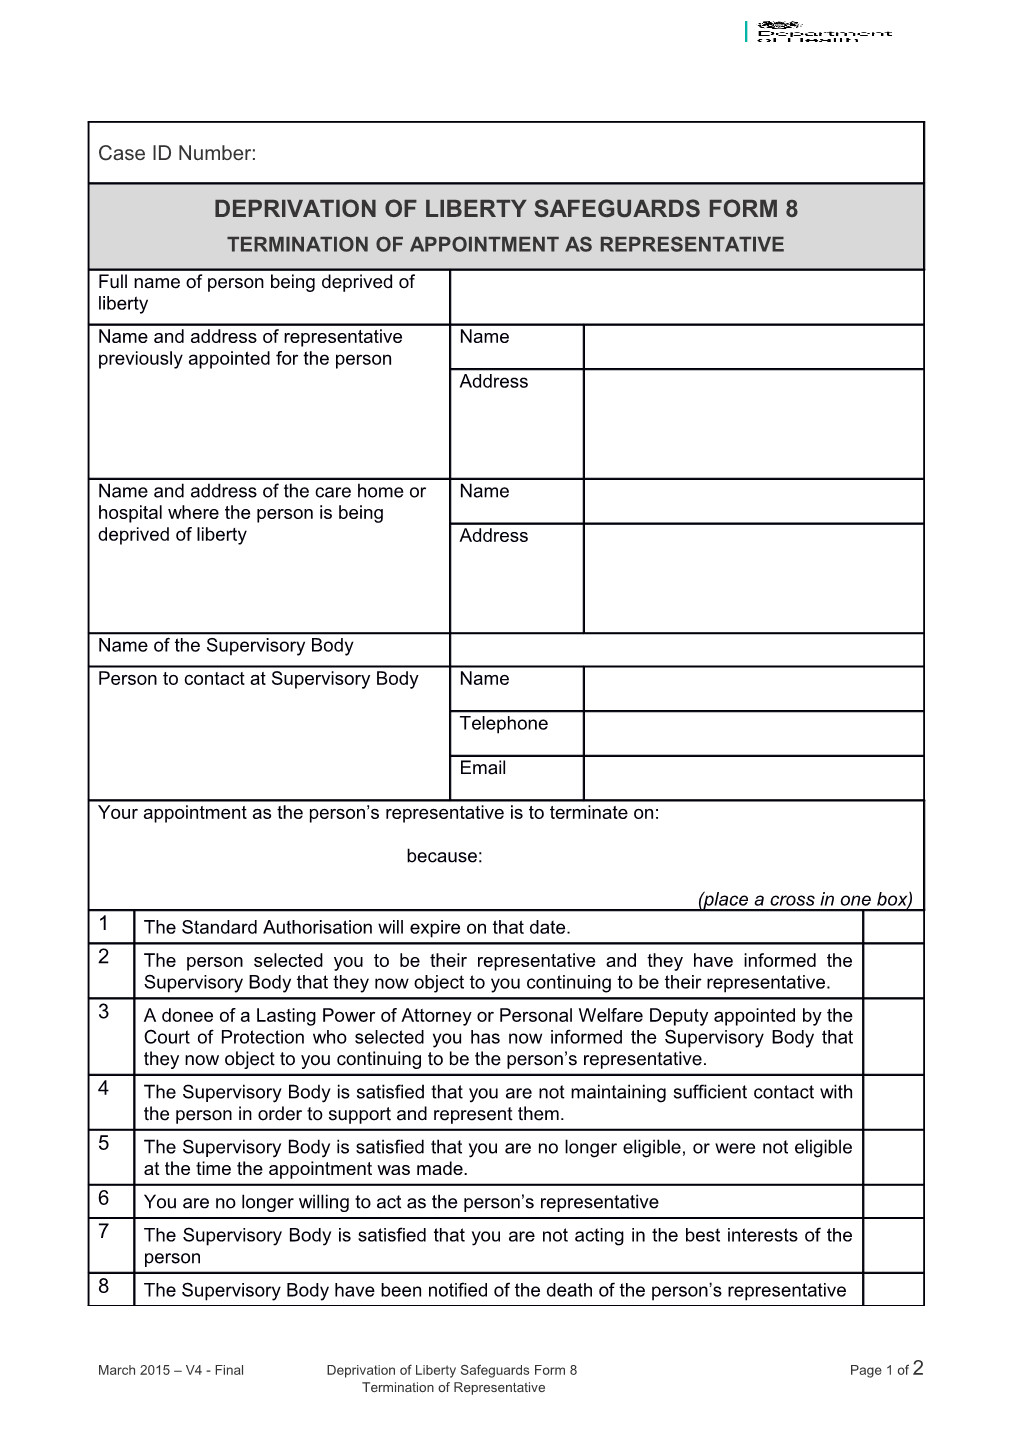 March 2015 V4 - Finaldeprivation of Liberty Safeguards Form 8 Page 1 of 2